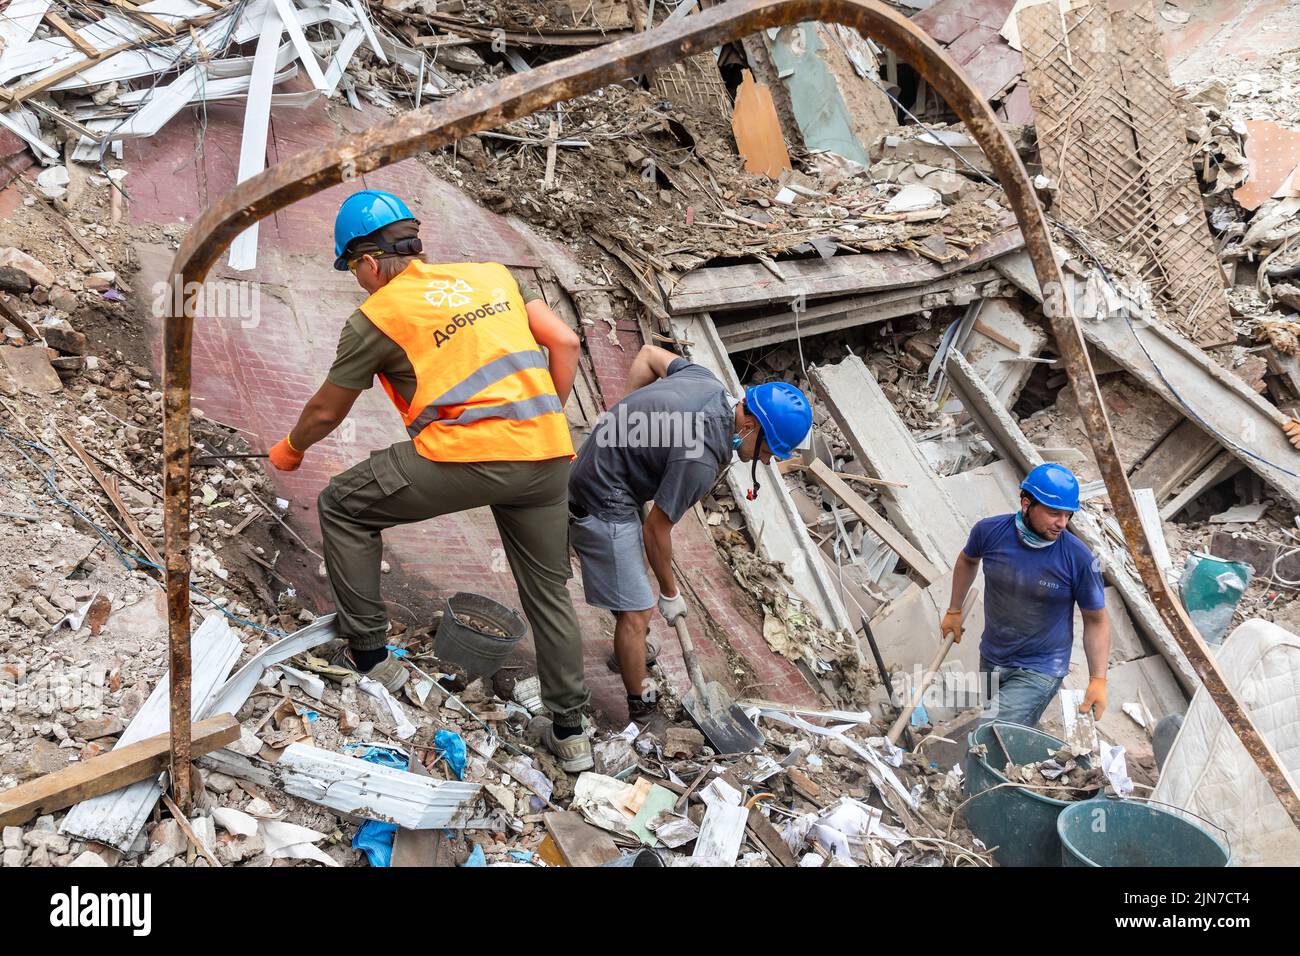 Volunteers clearing the rubble of a destroyed house as a result of the Russian shelling in the city of Kharkiv. Russia continues its invasion in Ukraine which started from February 24, 2022. (Photo by Mykhaylo Palinchak / SOPA Images/Sipa USA) Stock Photo